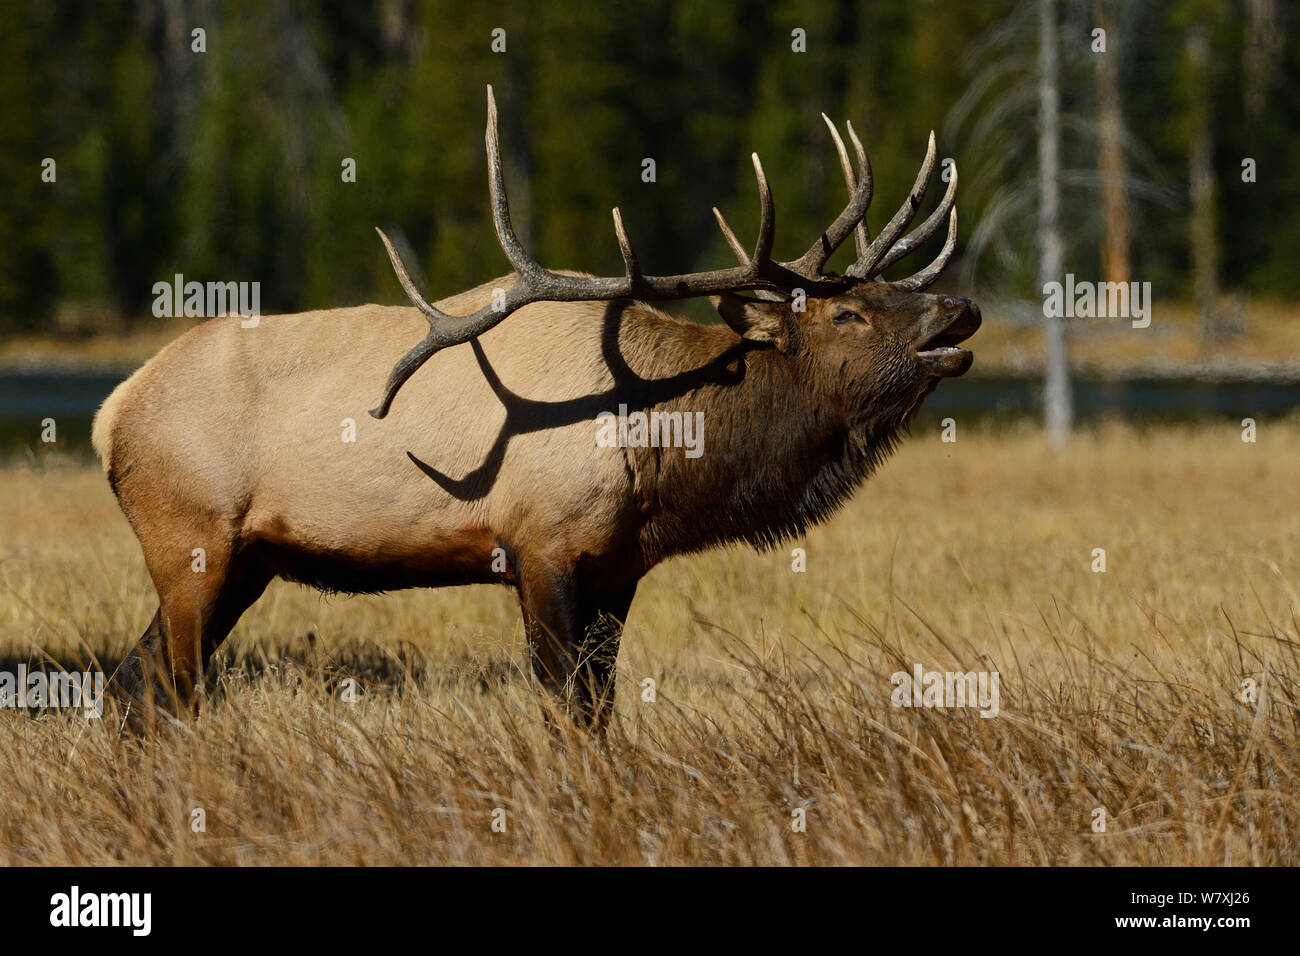 American elk (Cervus elaphus canadensis) stag calling during rut, Yellowstone National Park, Wyoming, USA. October. Stock Photo